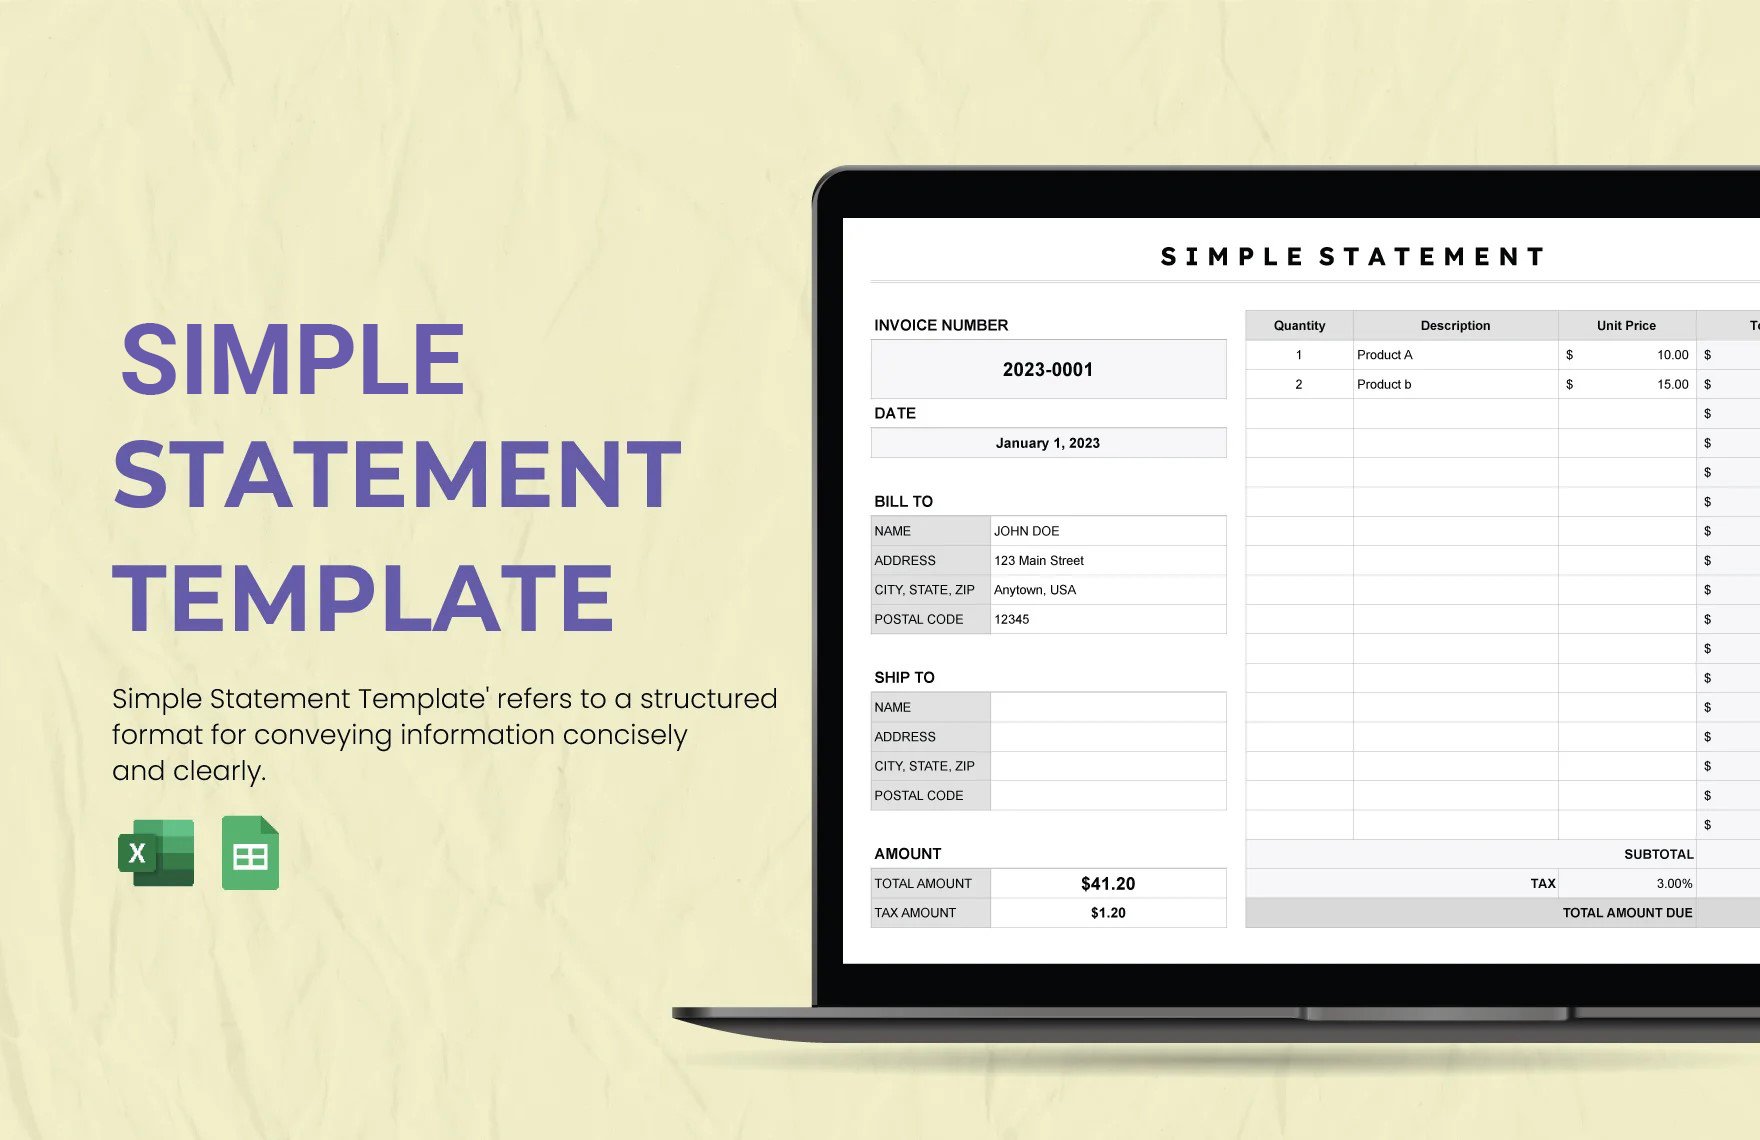 Free Simple Statement Template in Excel, Google Sheets